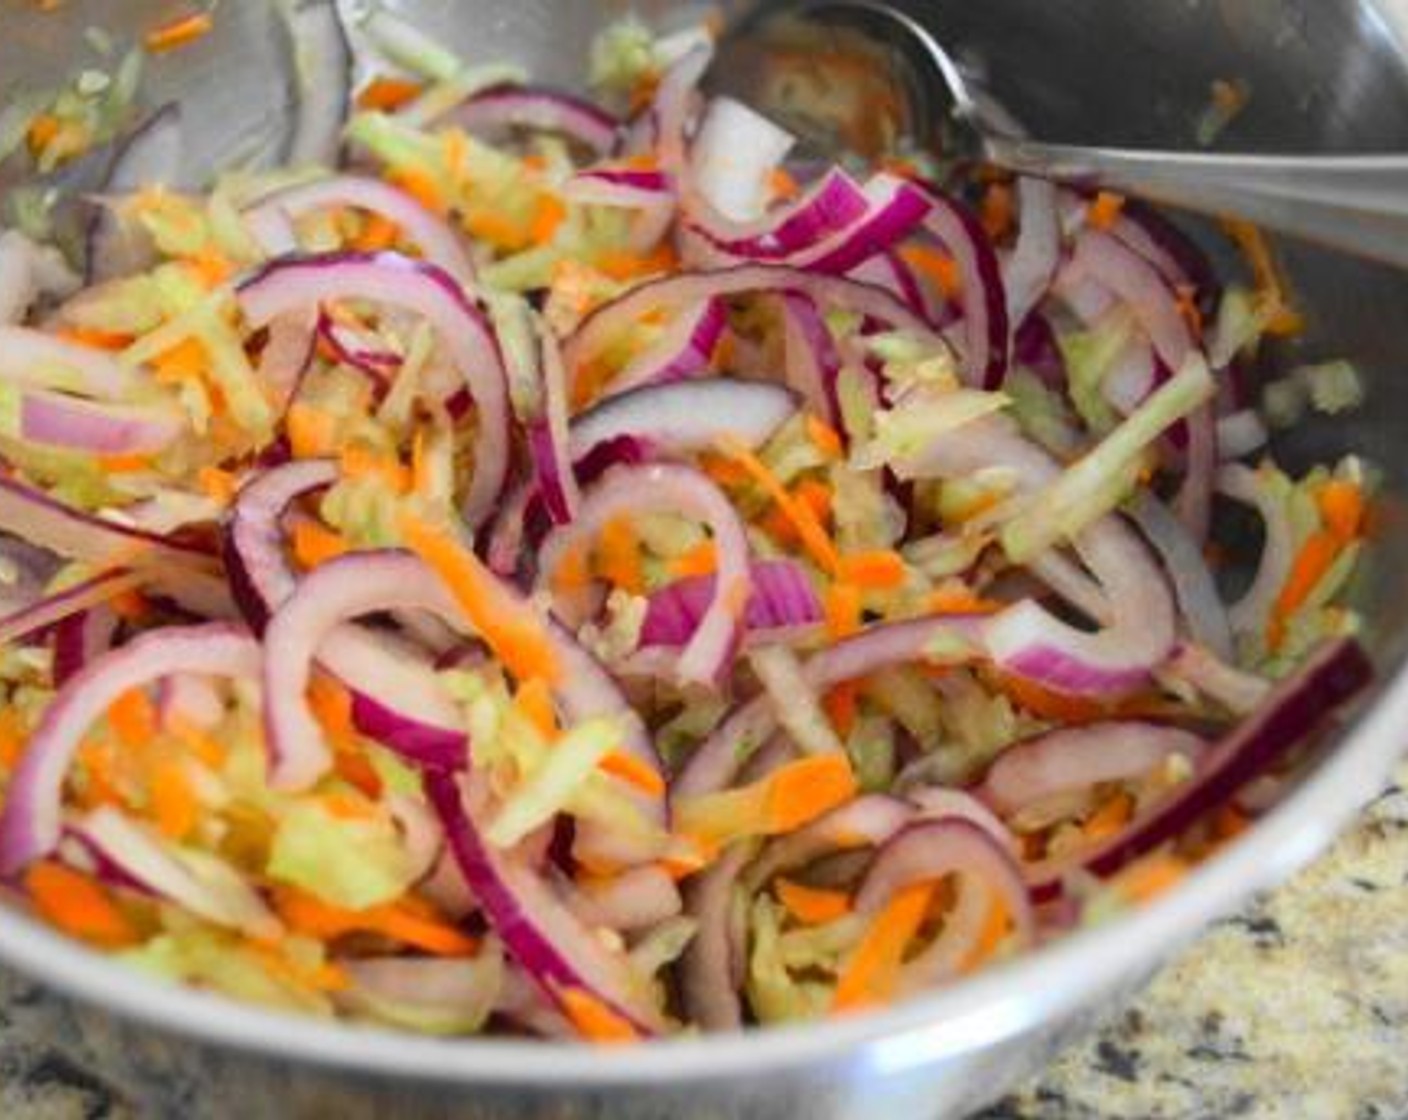 step 1 First, prepare the Asian Slaw. Combine the sliced Red Onion (1), Carrot (1), Cucumber (1), Salt (1 pinch), zest and lime of the Lime (1), and Soy Sauce (1/2 tsp). Stir them together thoroughly and set it aside. Let the flavors all marinate together and marry while you prepare the sauce and shrimp.